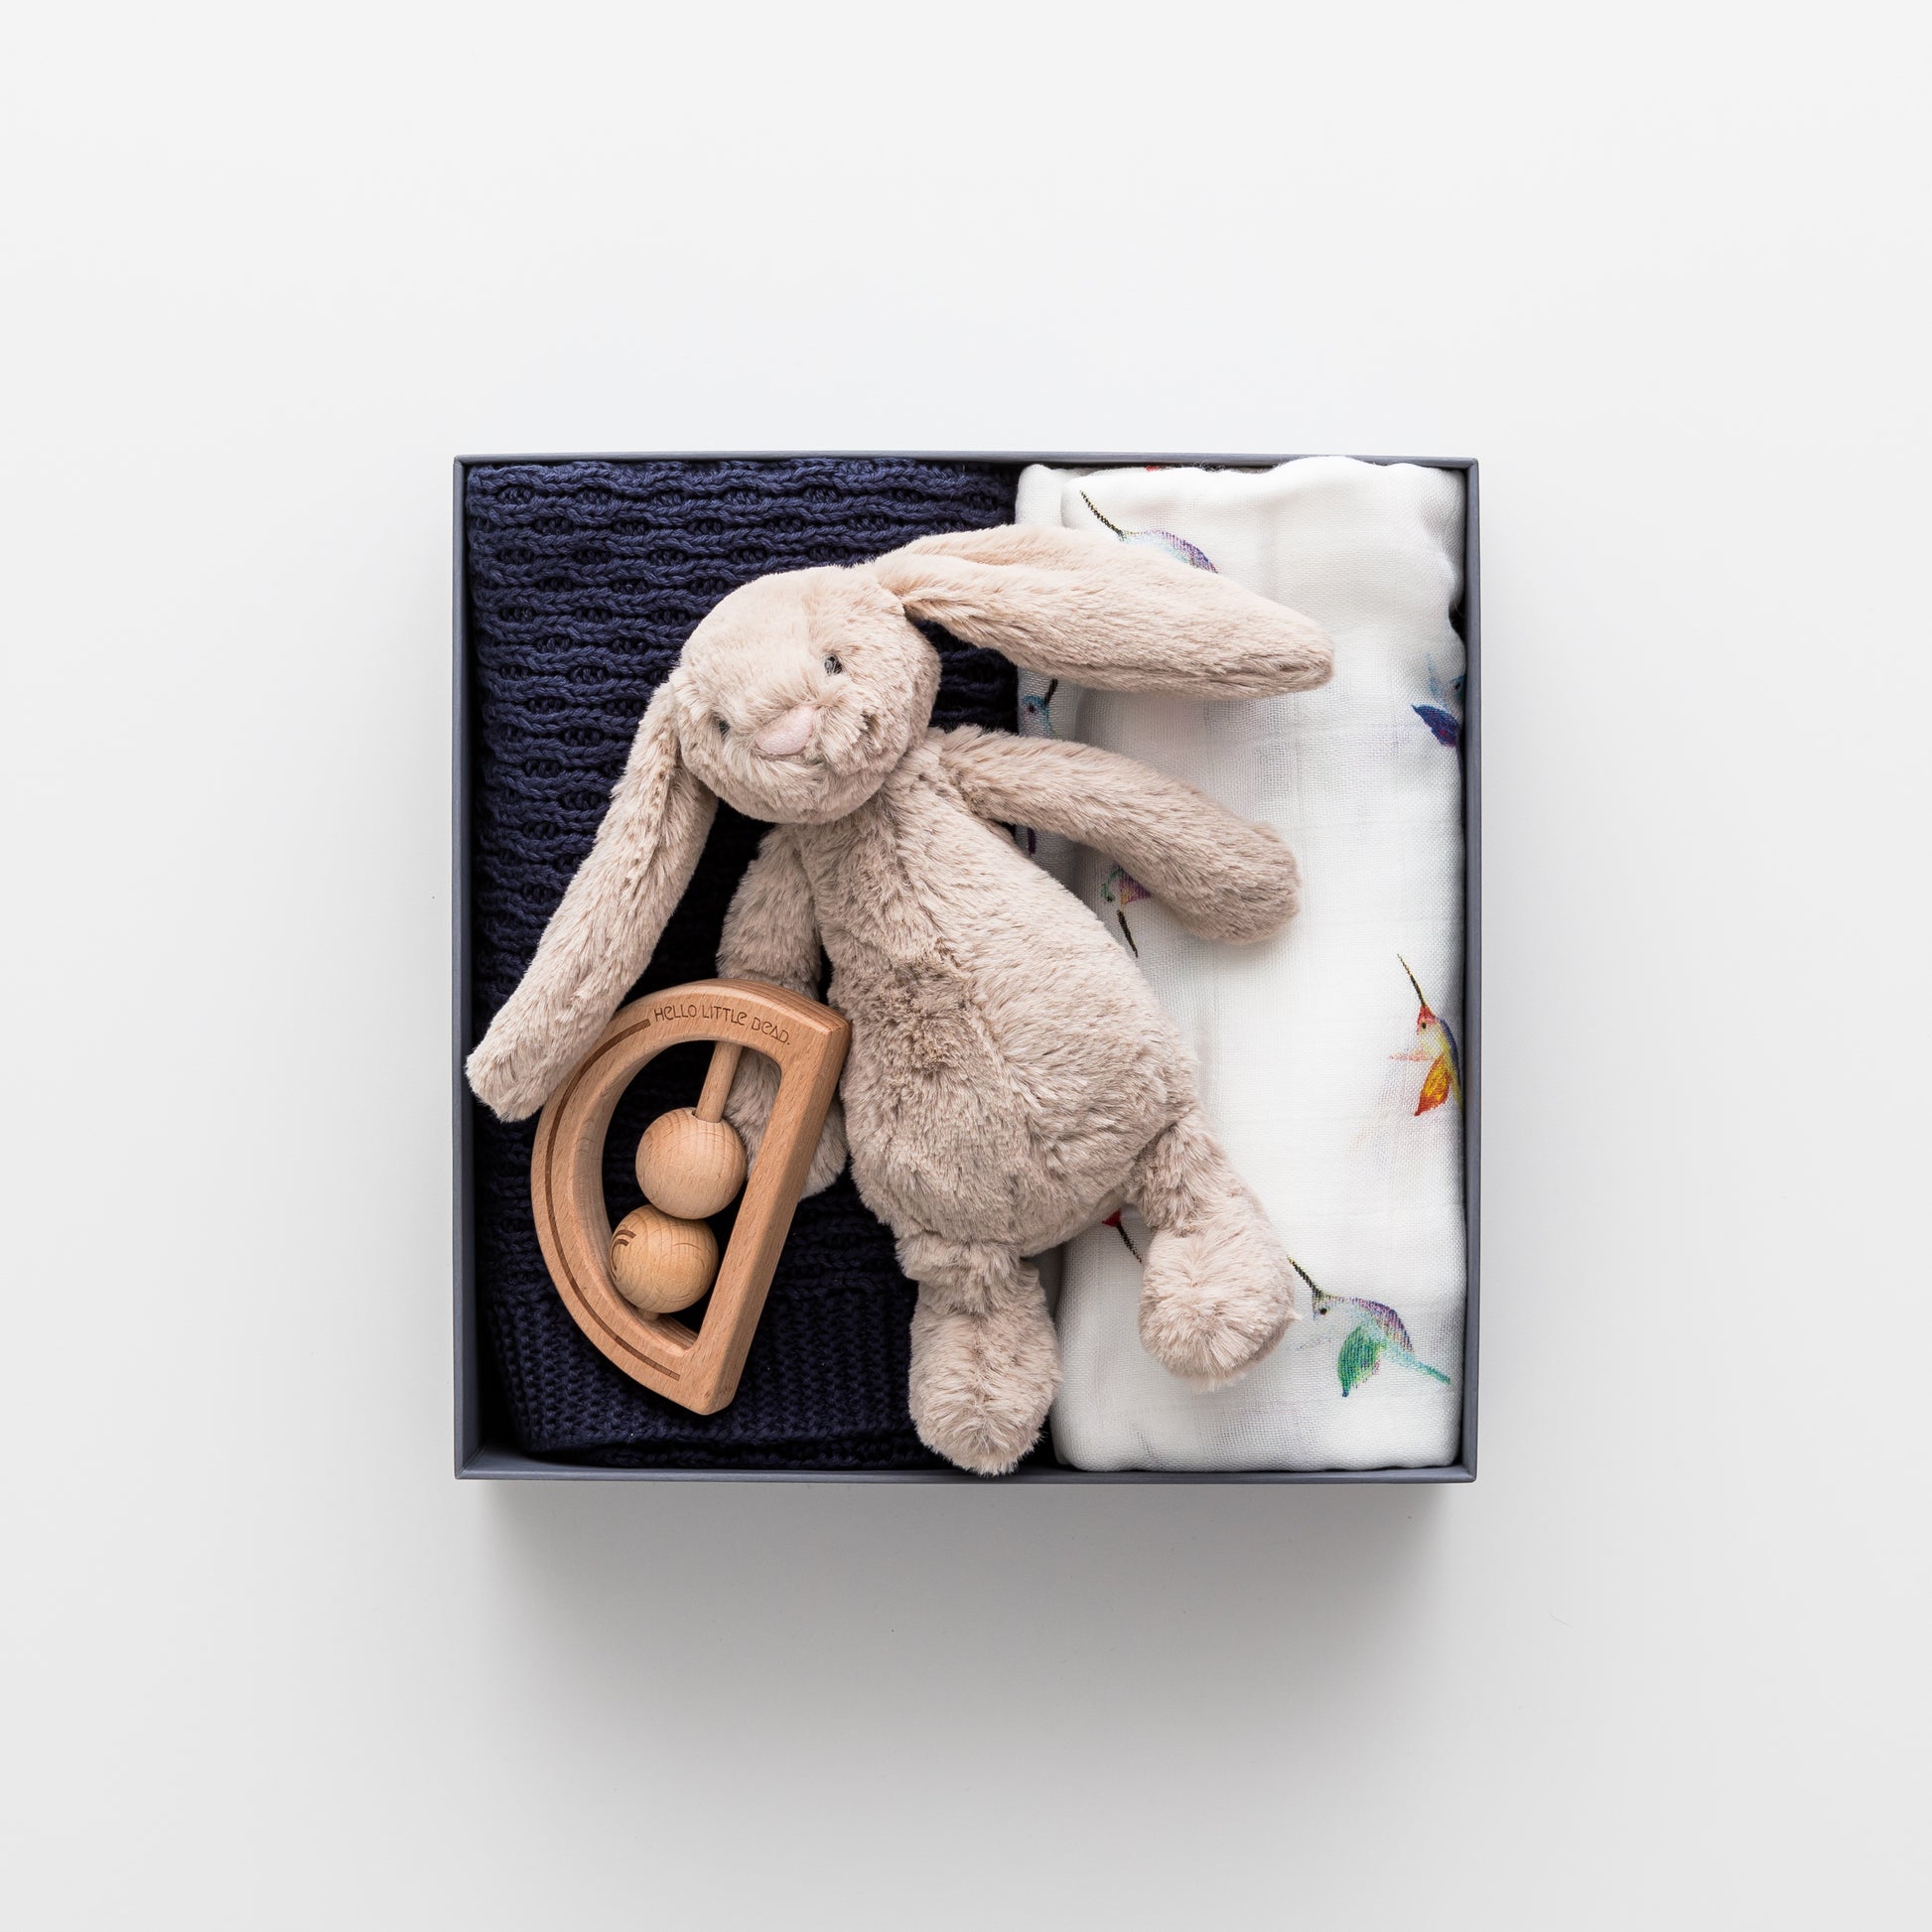 Gift box includes cotton blanket, wooden teether, bashful bunny.